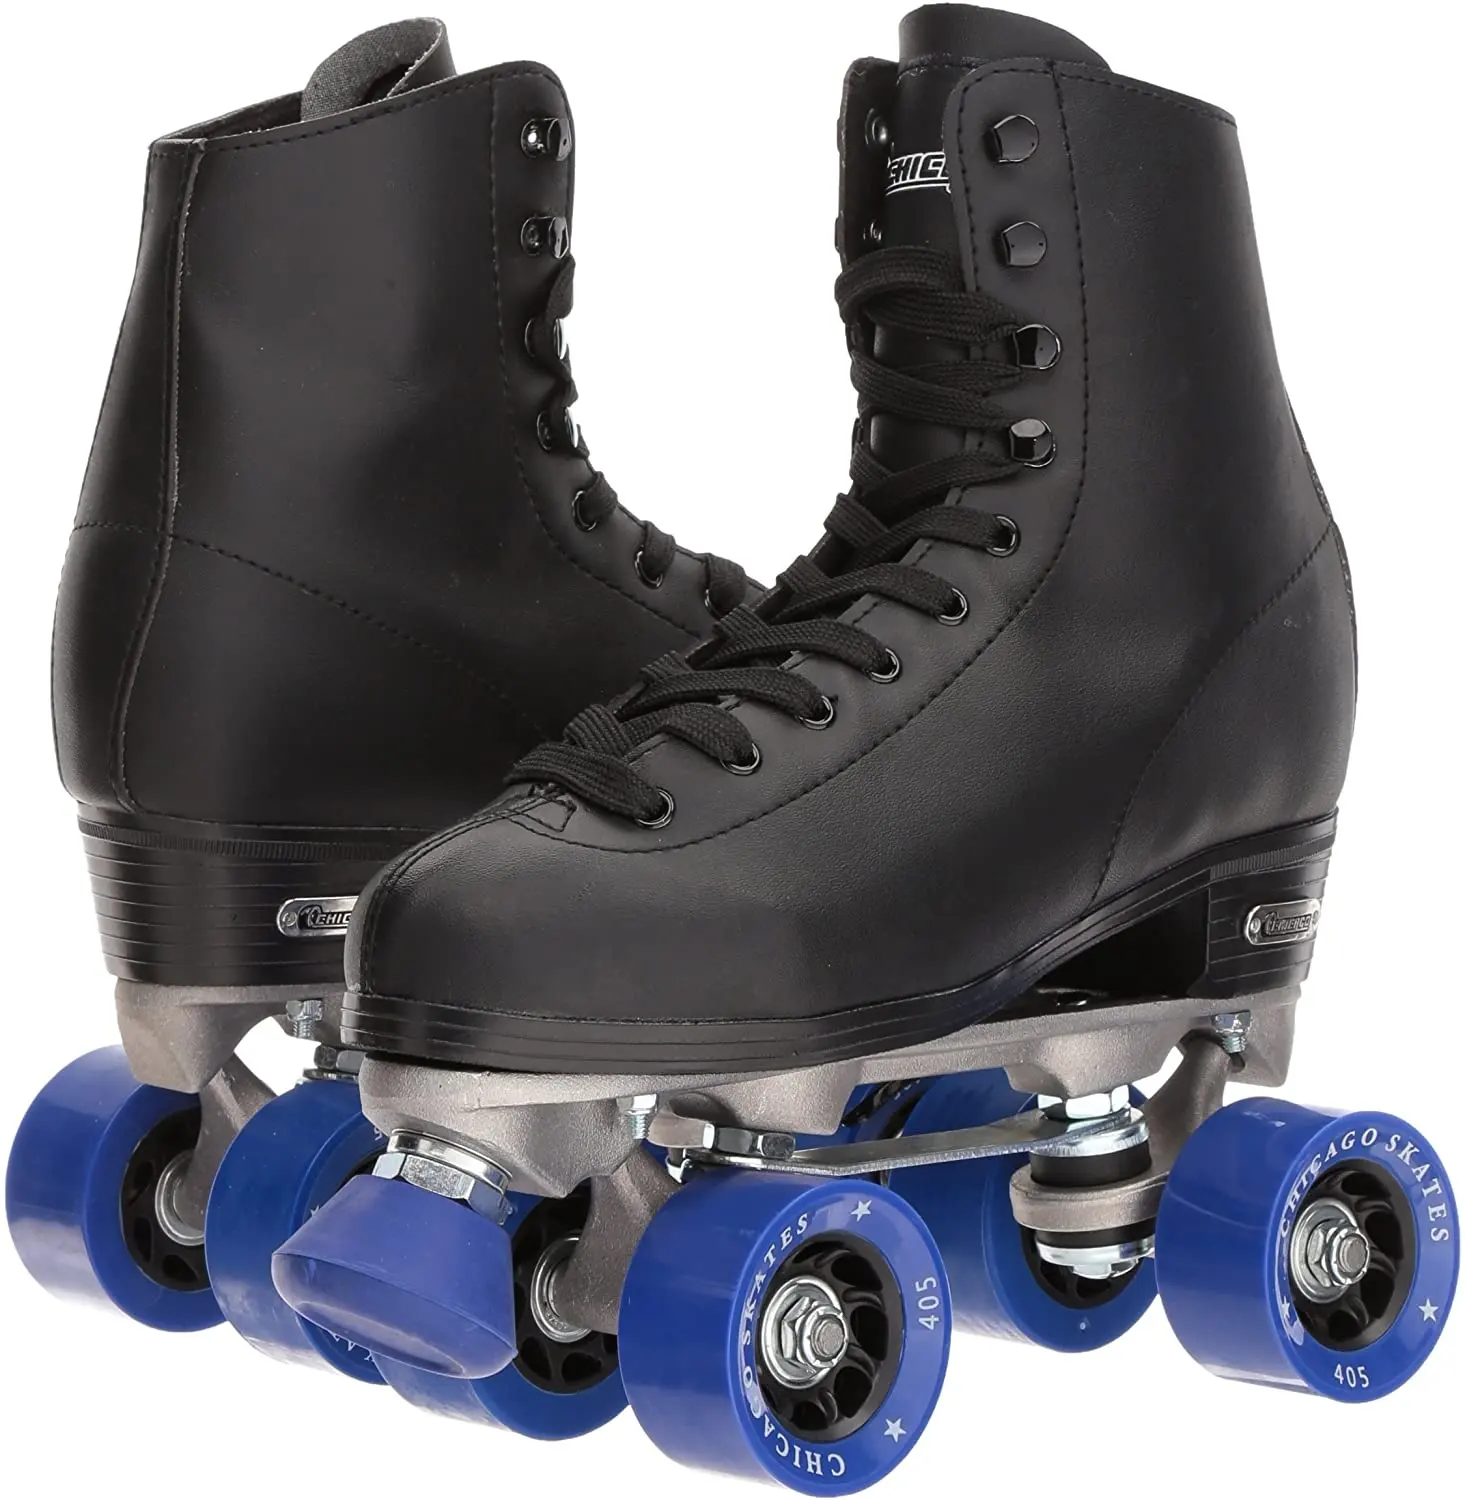 Roller Skate Wheels China Trade,Buy China Direct From Roller Skate 